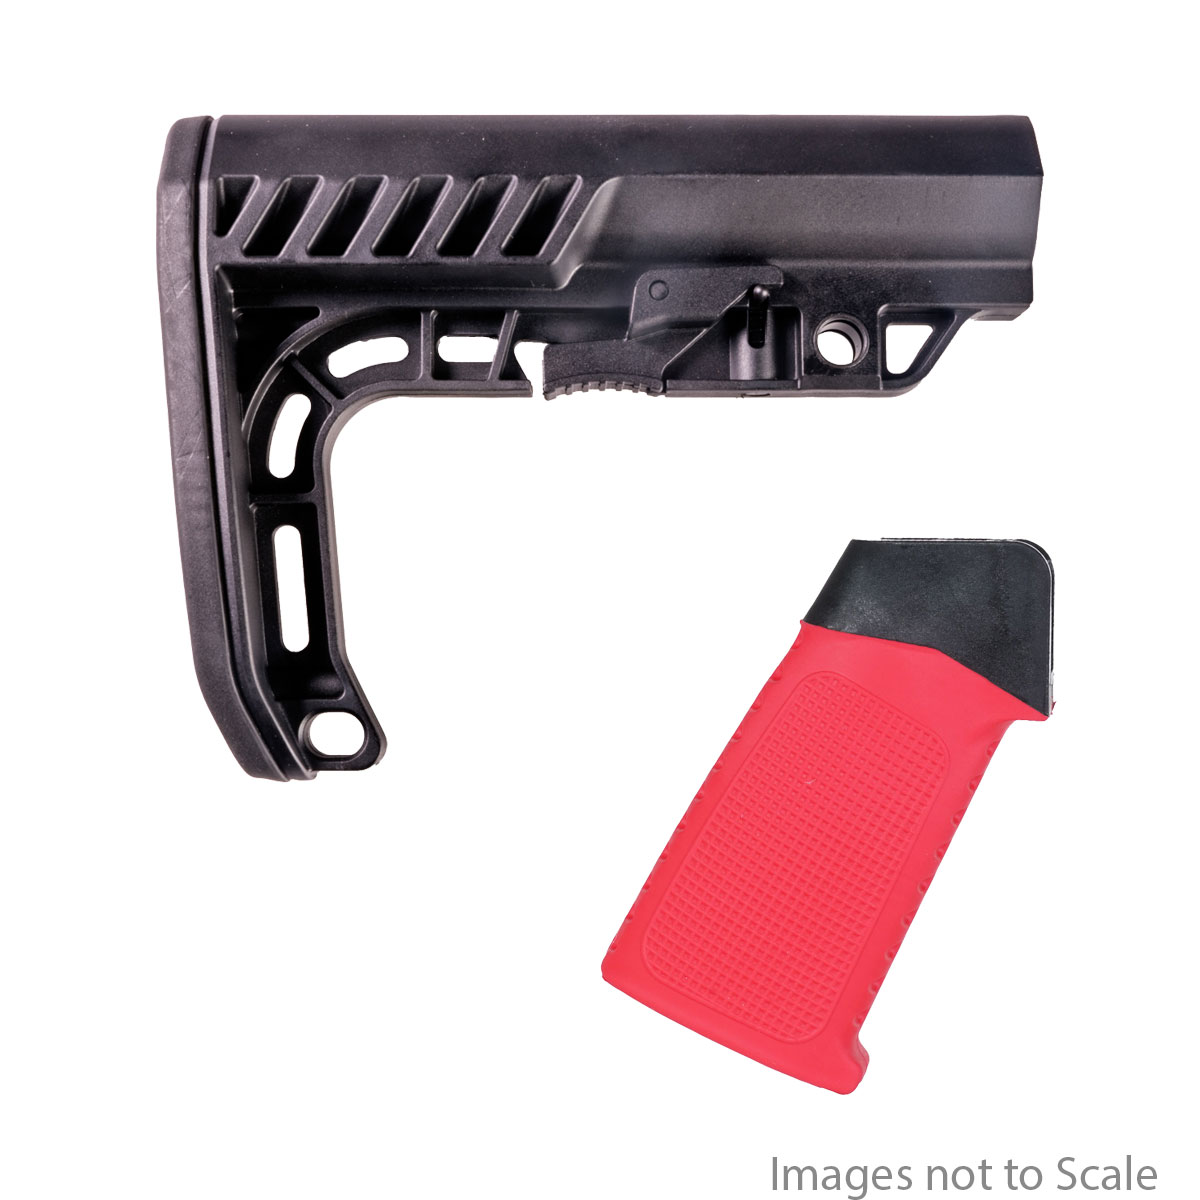 Furniture Upgrade Kit: Team Accessories Corp AR15 Grip Window Grip Straight Top Textured/Ribbed Red  + Gauntlet Arms Minimalist AR-15 Stock